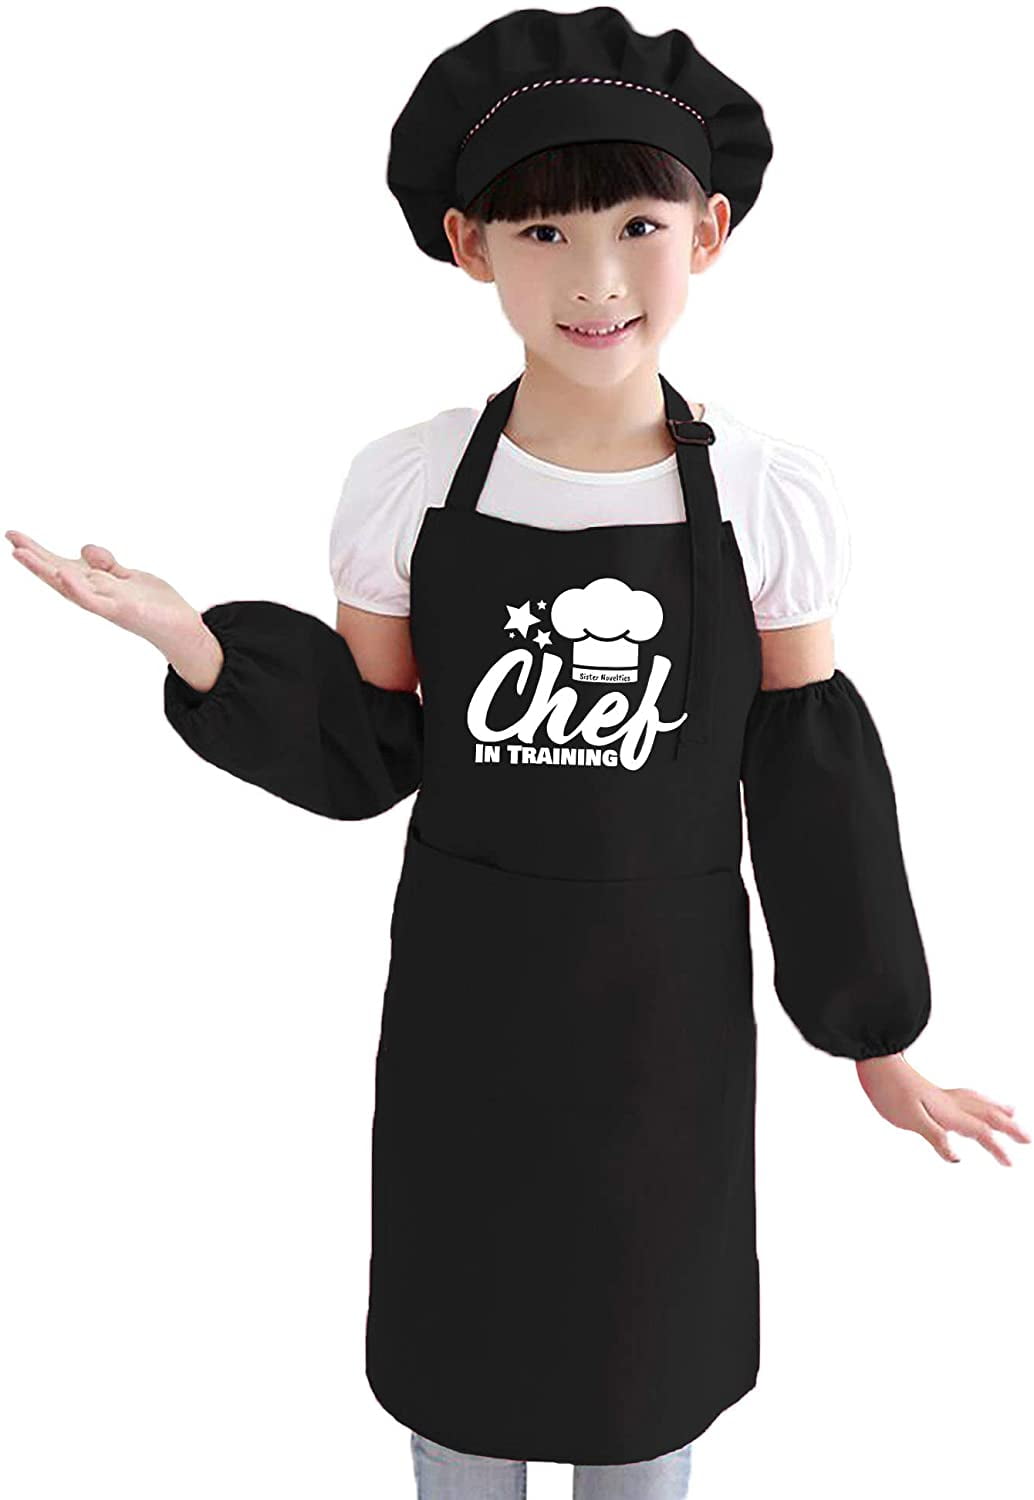 Blue Aprons Set + Easy Bake Oven Apron with Matching Chef Hat and Sleeves for Boys and Girls Sister Novelties Easy Bake Ultimate Oven Bundled with Childrens Chef in Training Apron Set 